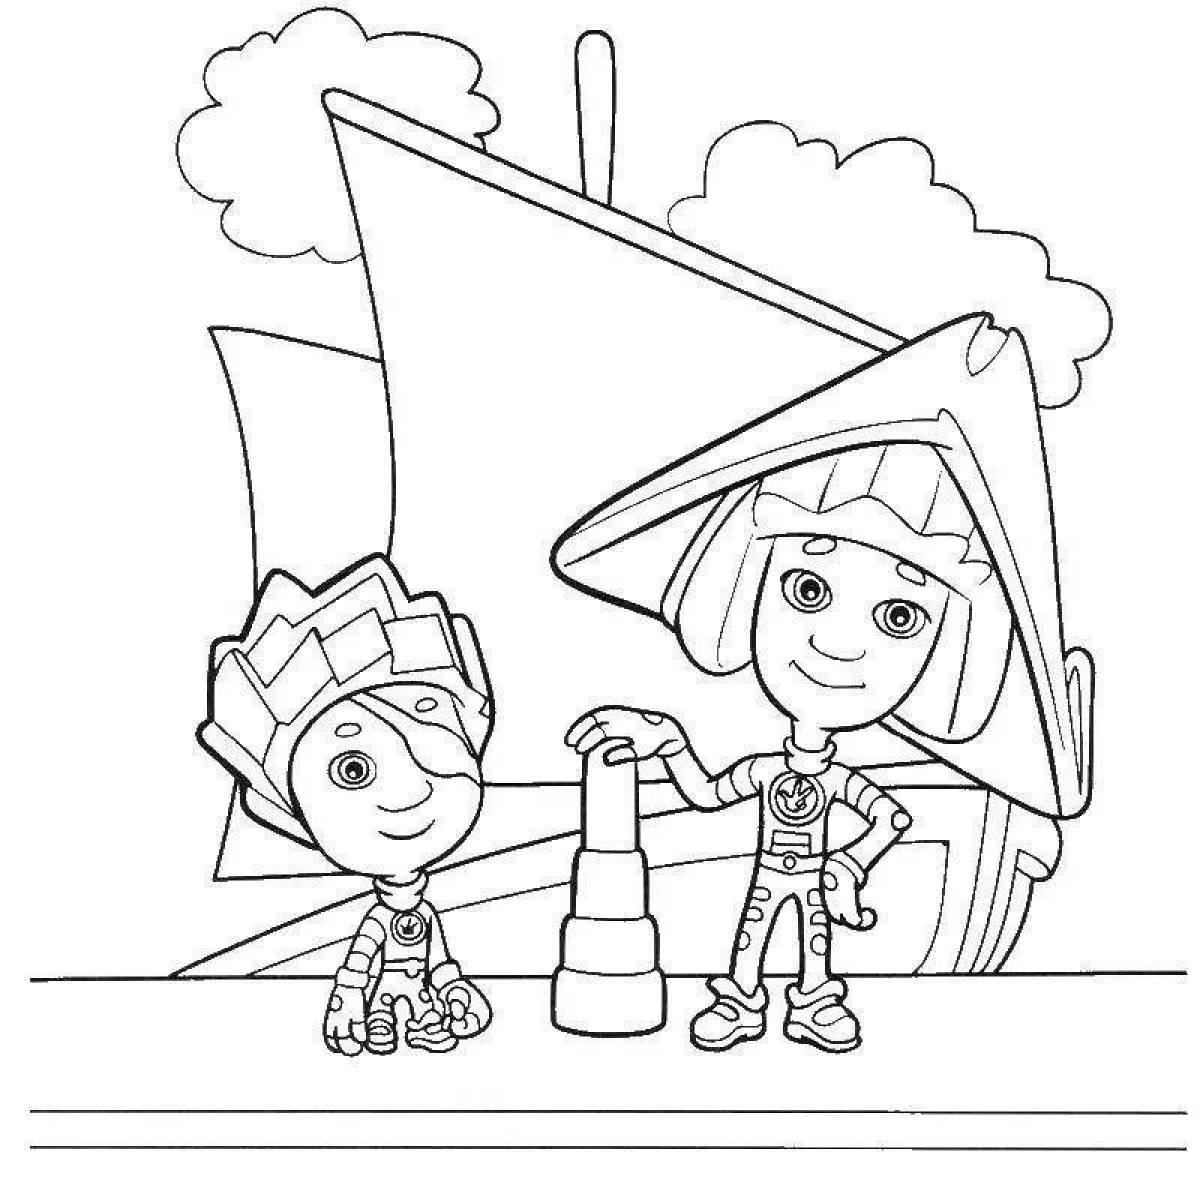 Exquisite fixies coloring pages for boys